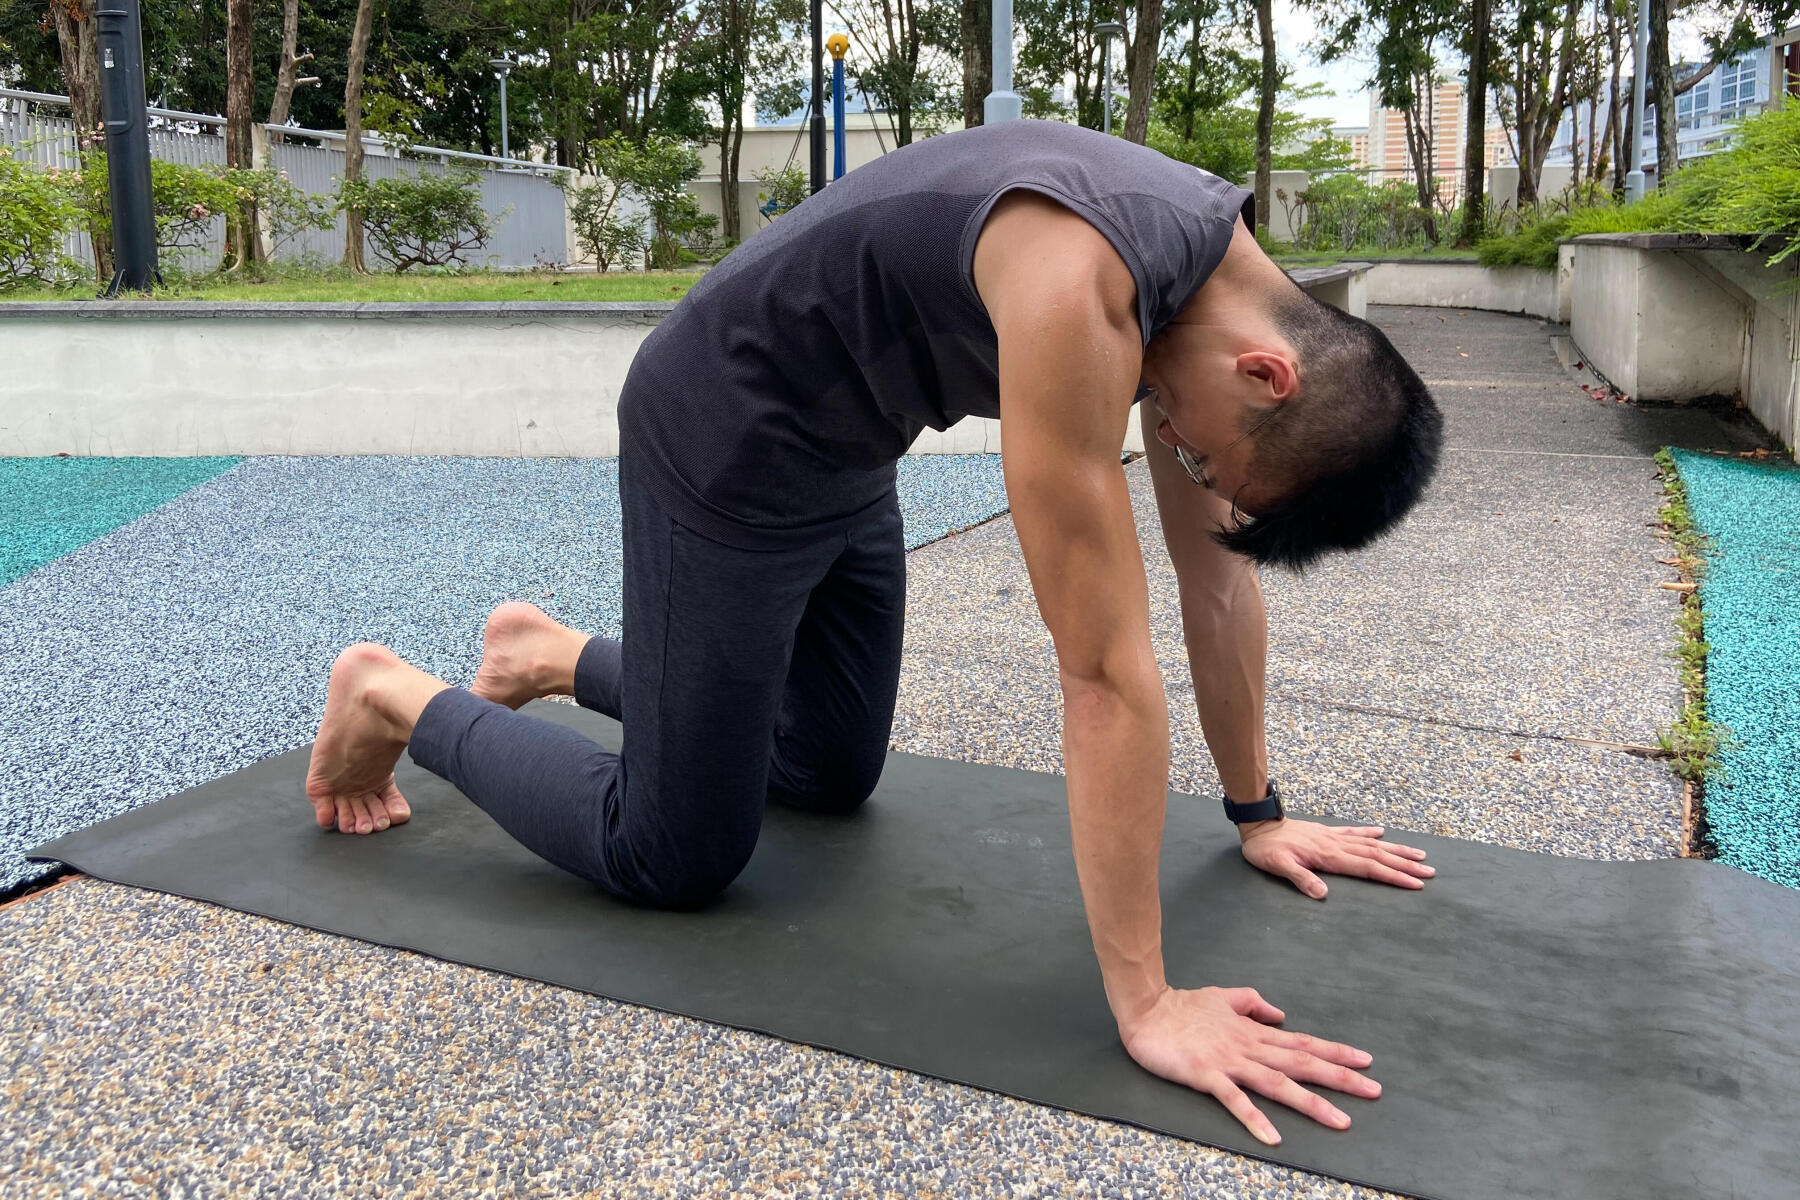 How Yoga has Aided Me on My Cycling Journey by Clifton Yeo